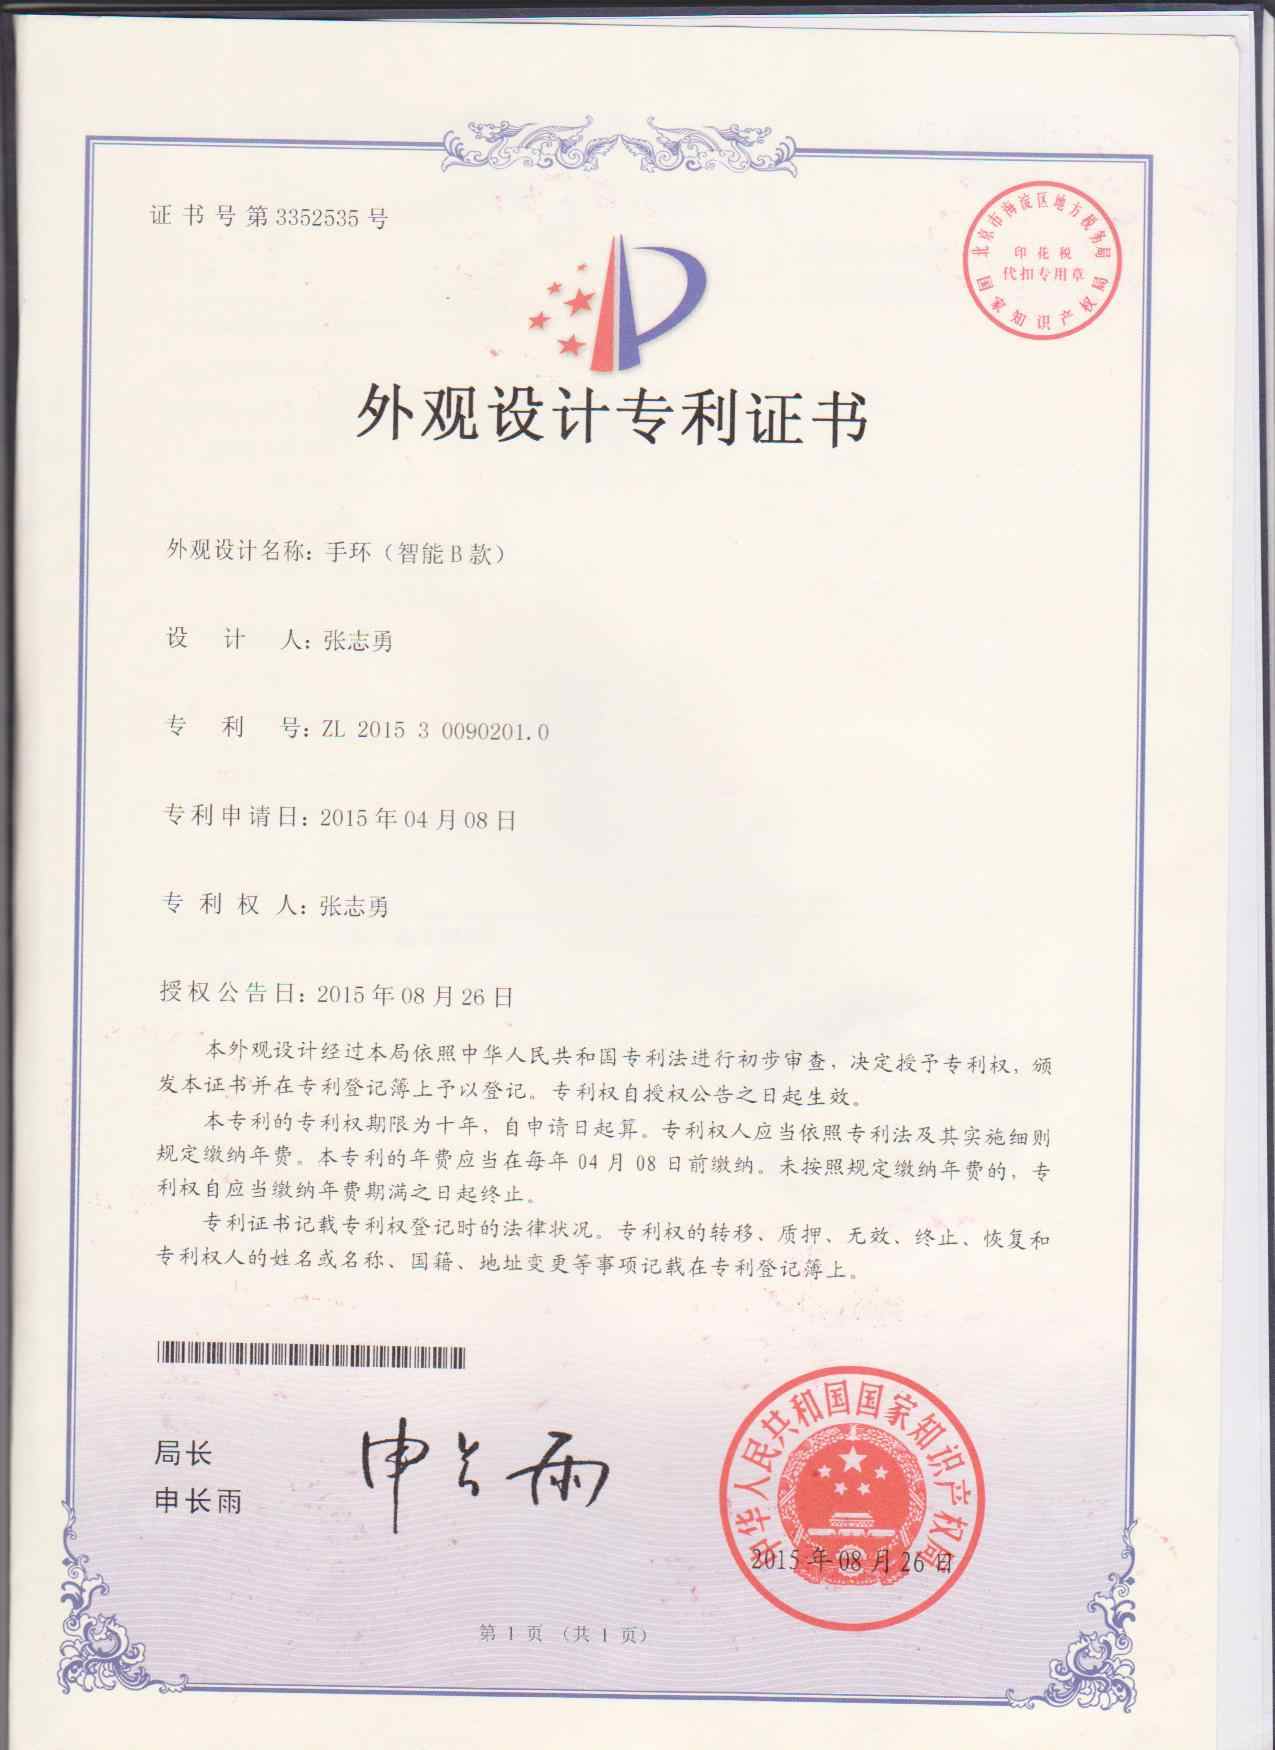 Appearance of the patent certificate of TW64 smart bracelet